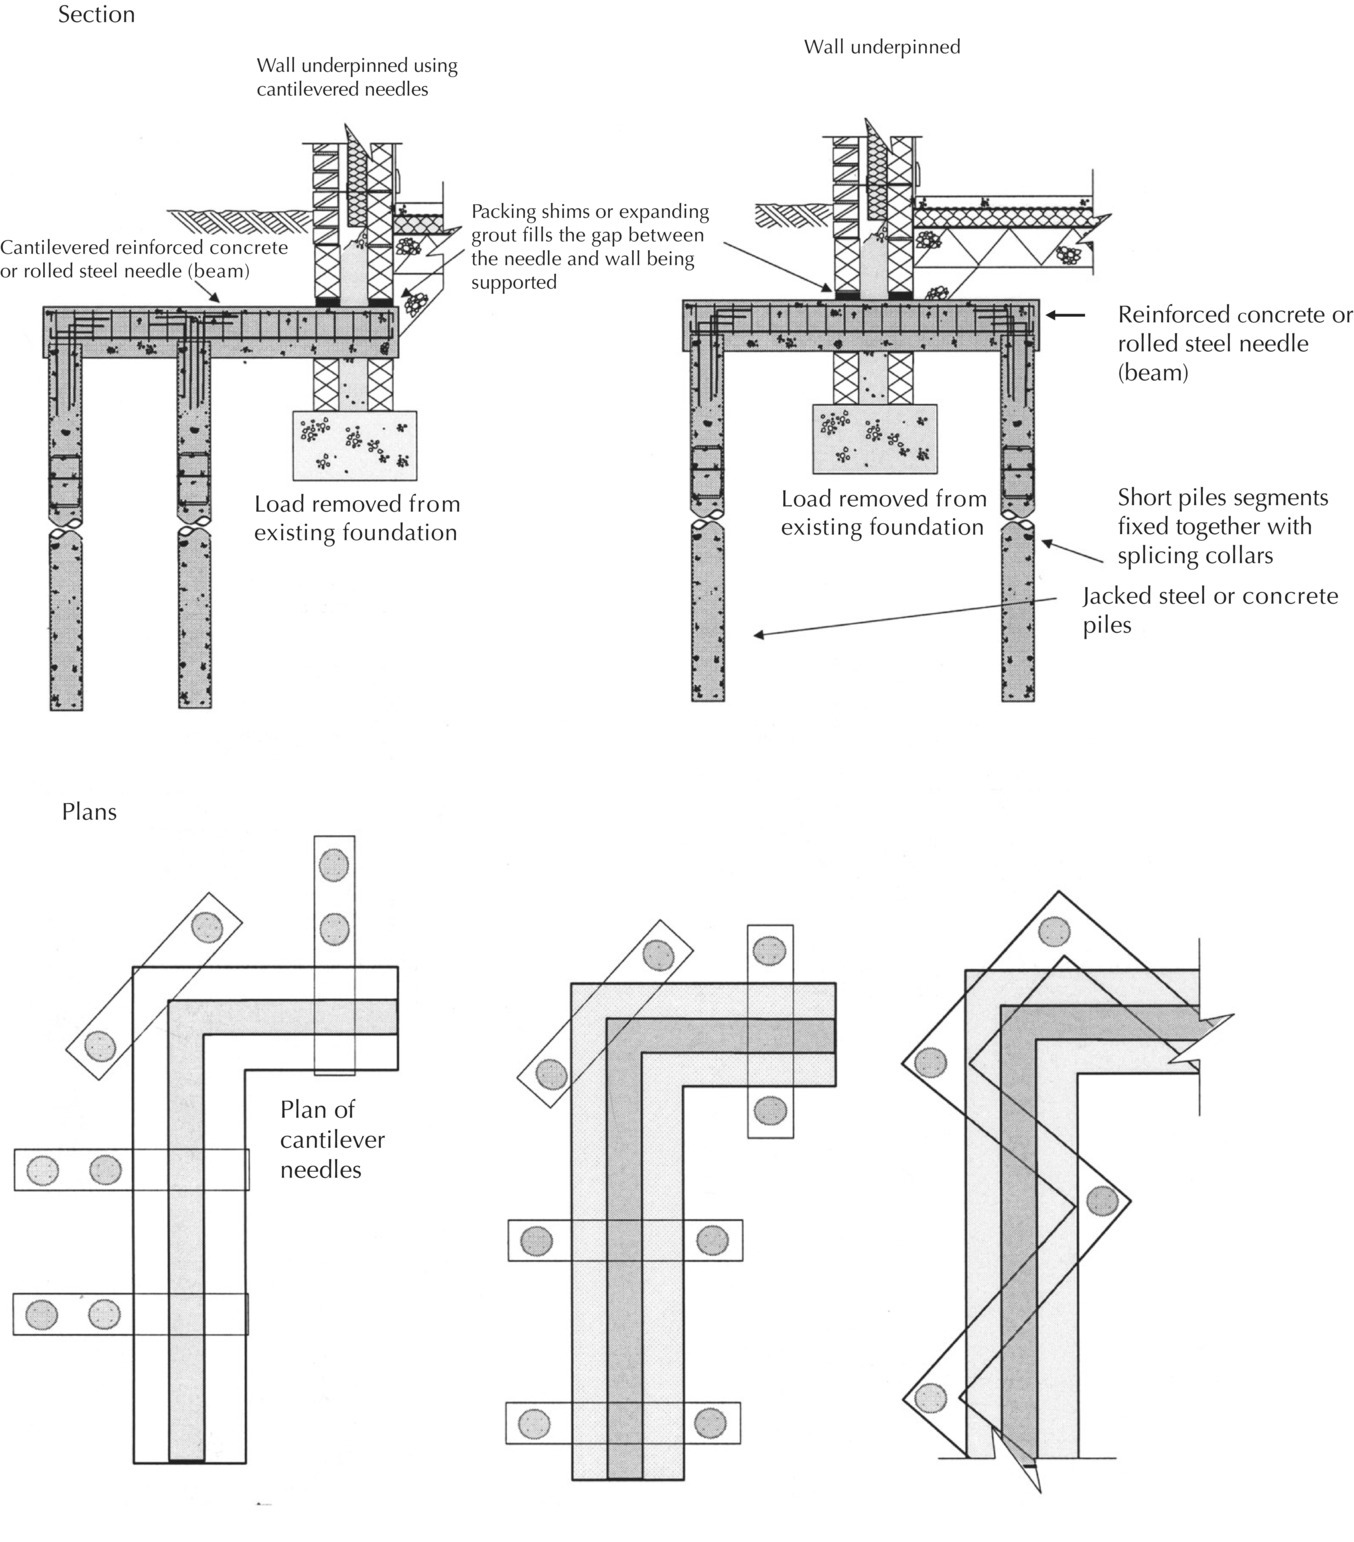 Diagram of wall underpinned using cantilevered needles with arrows depicting cantilevered reinforced concrete or rolled steel needle (beam) and packing shims or expending the grout fills the gap…, etc; wall underpinned with arrows depicting reinforced concrete or rolled steel needle (beam), short piles segments fixed together with splicing collars, jacked steel or concrete piles, etc.; and plans of cantilever needles.